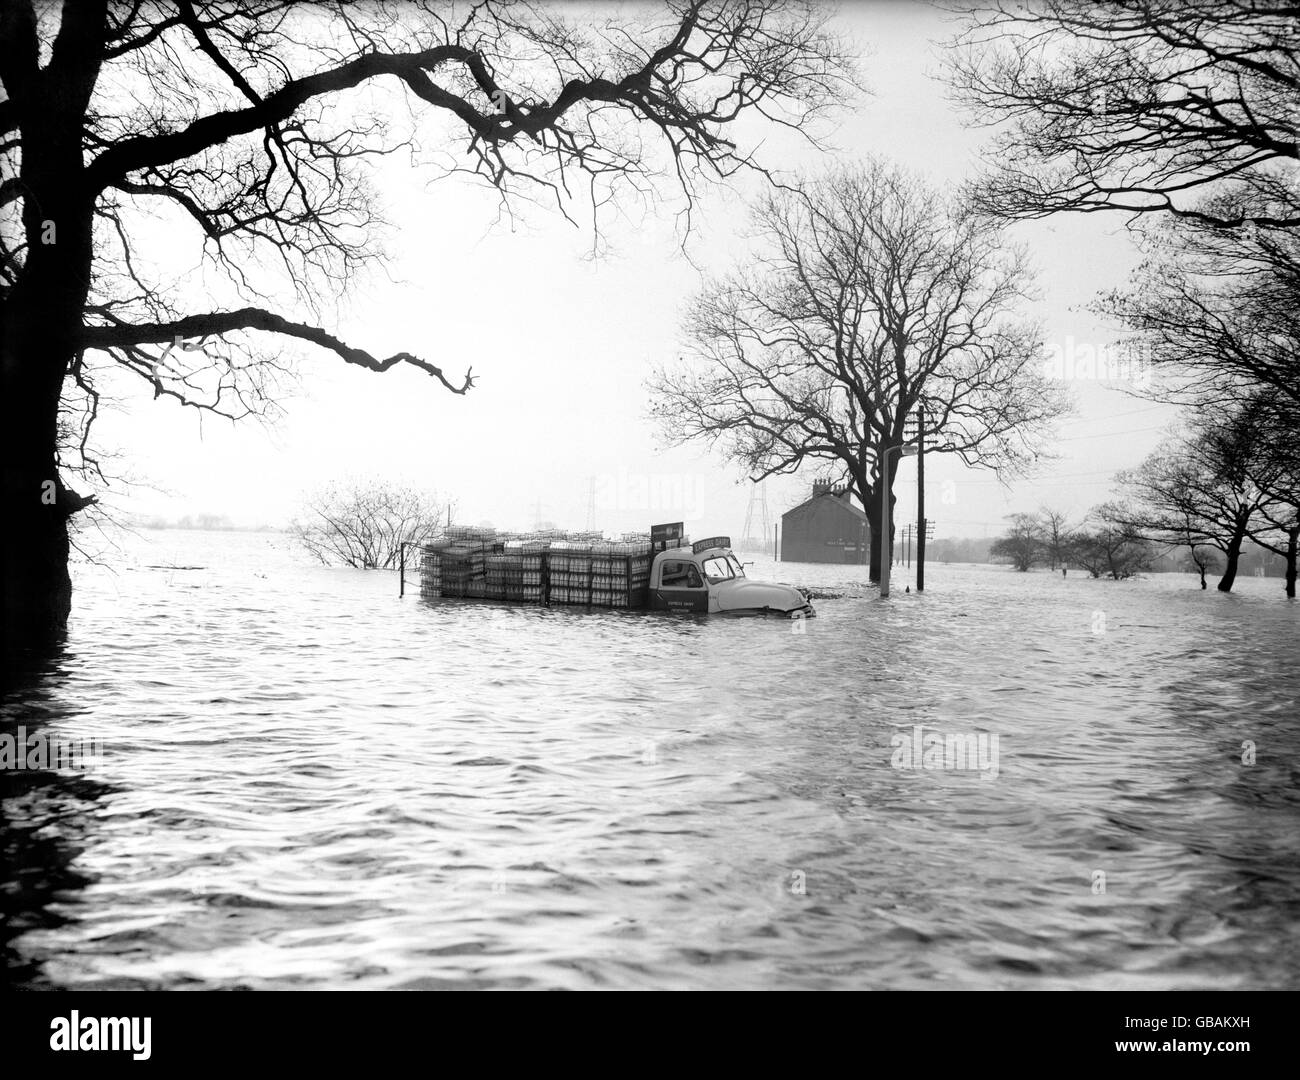 With its wheels completely submerged, a milk float is stranded in deep floods at Methley, near Leeds, Yorkshire. Stock Photo